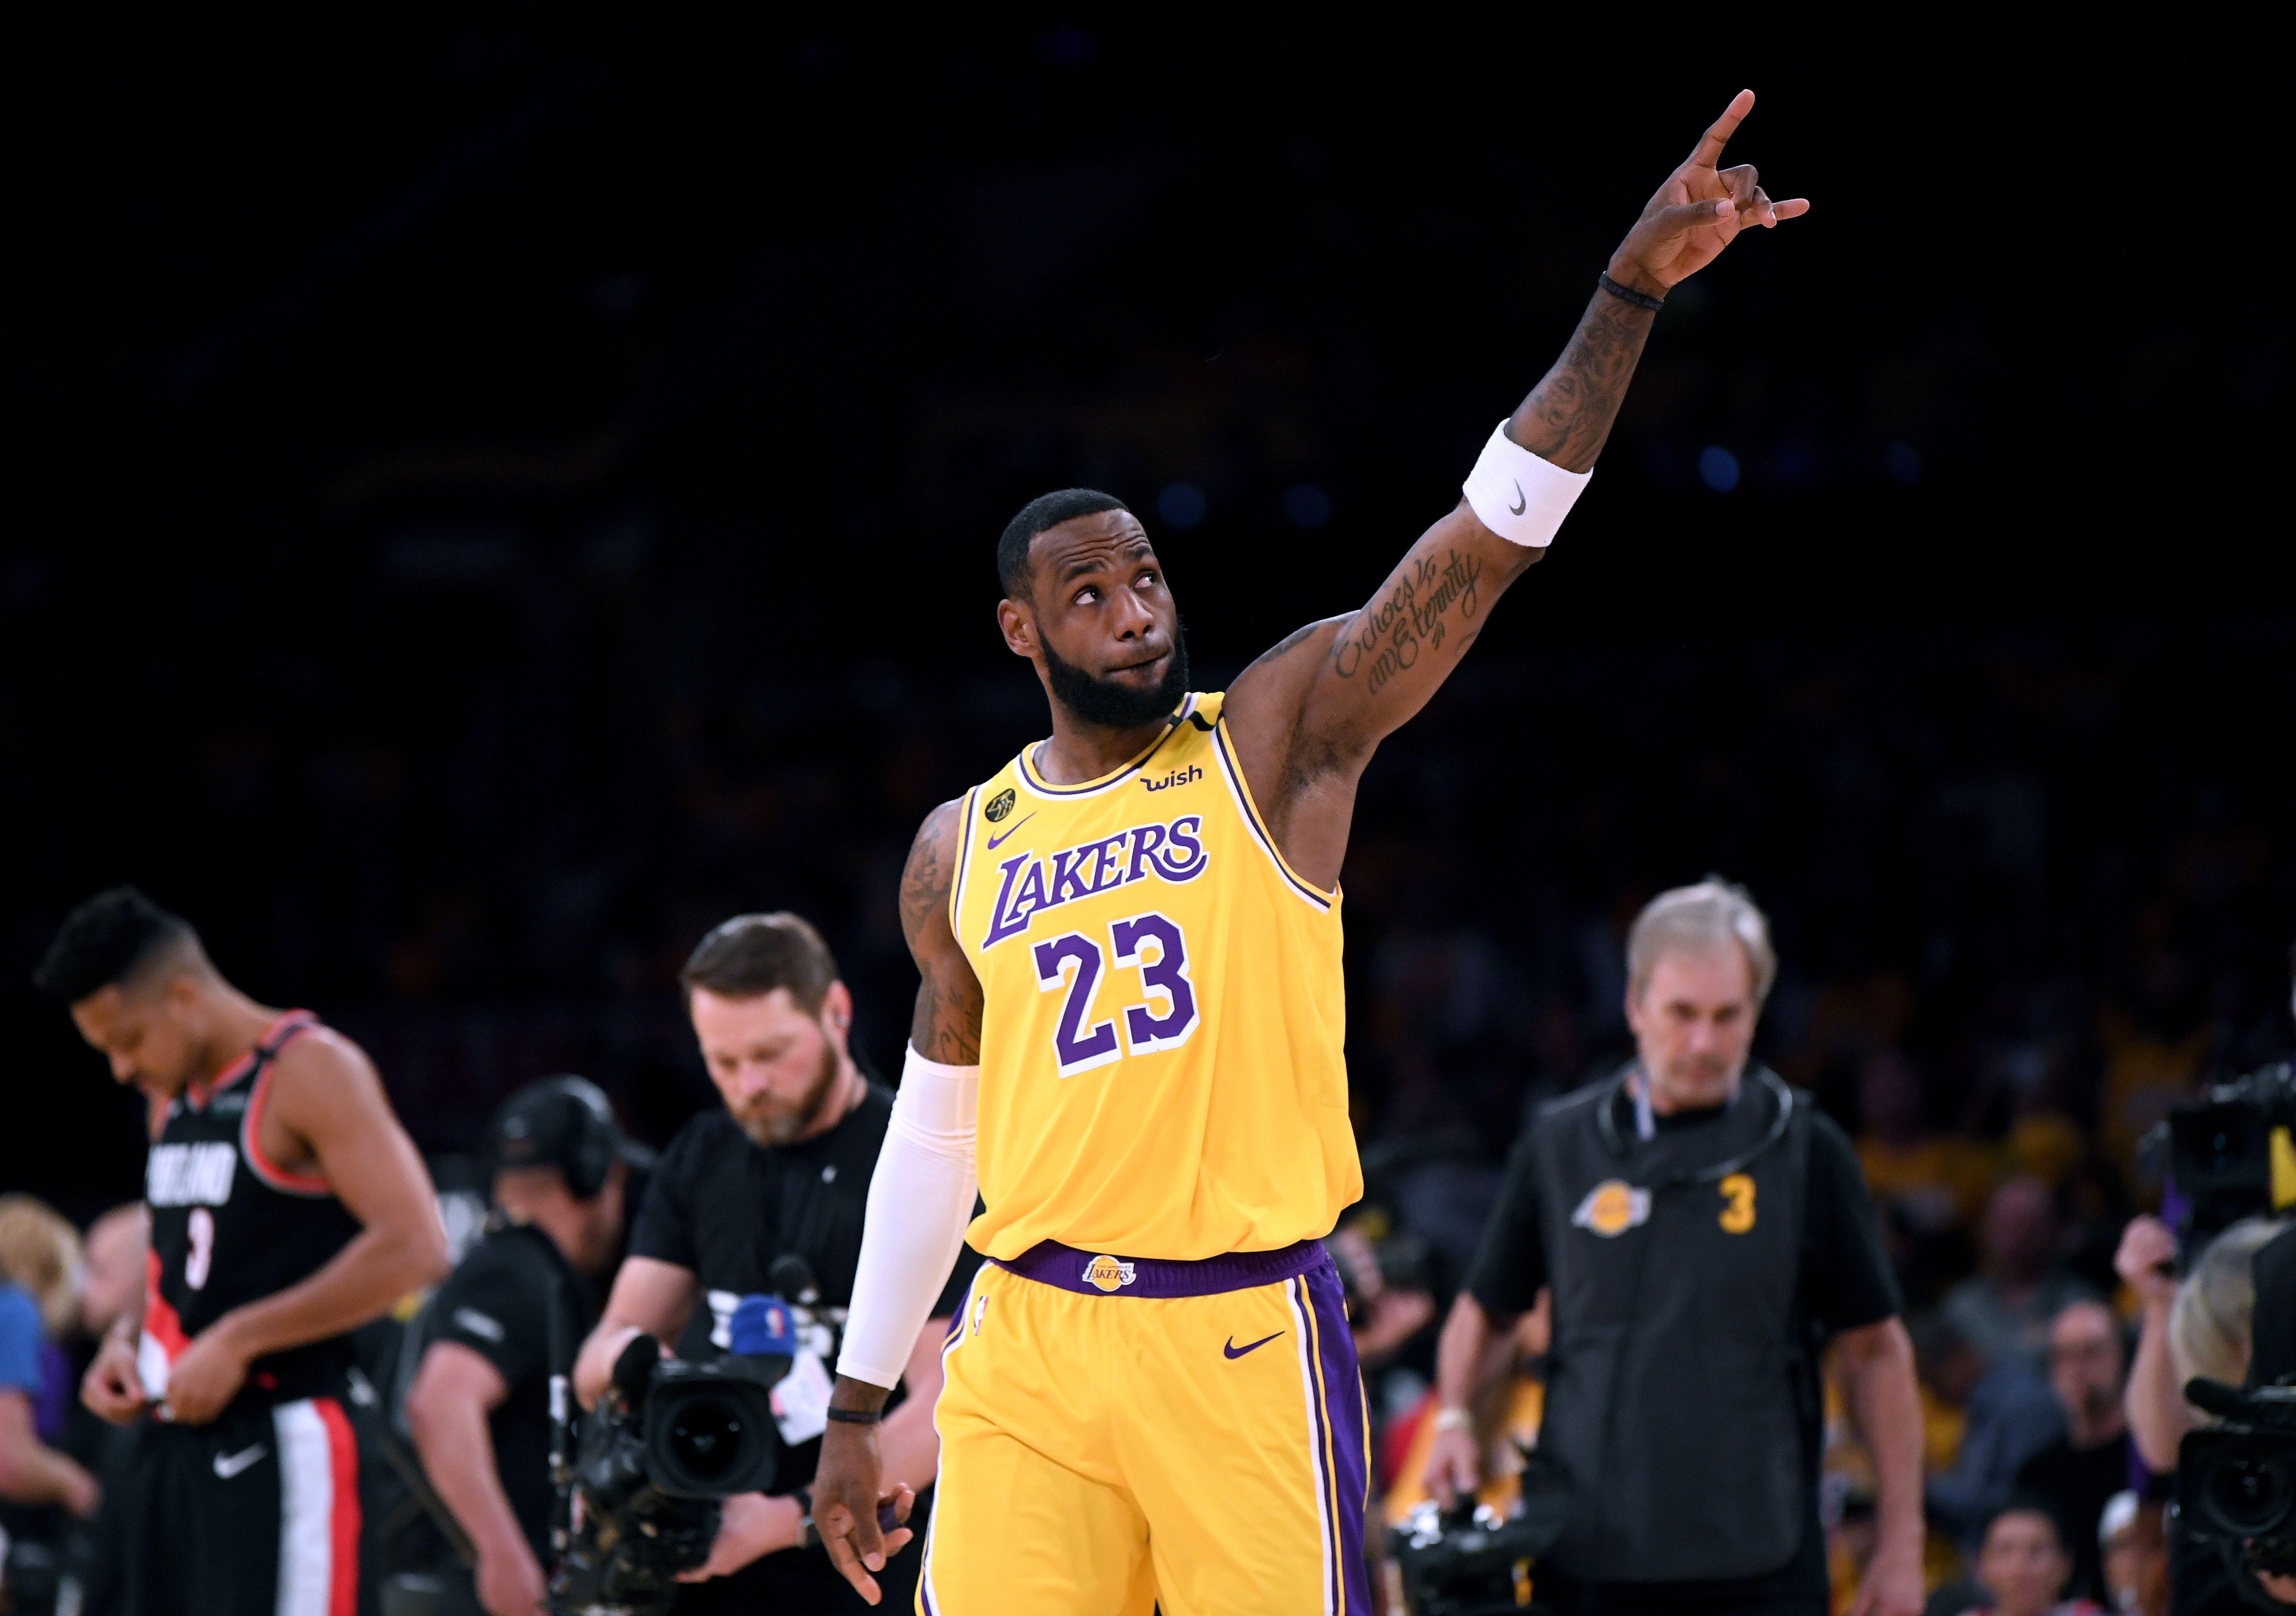 In this image, Lebron James points points upwards while on the court